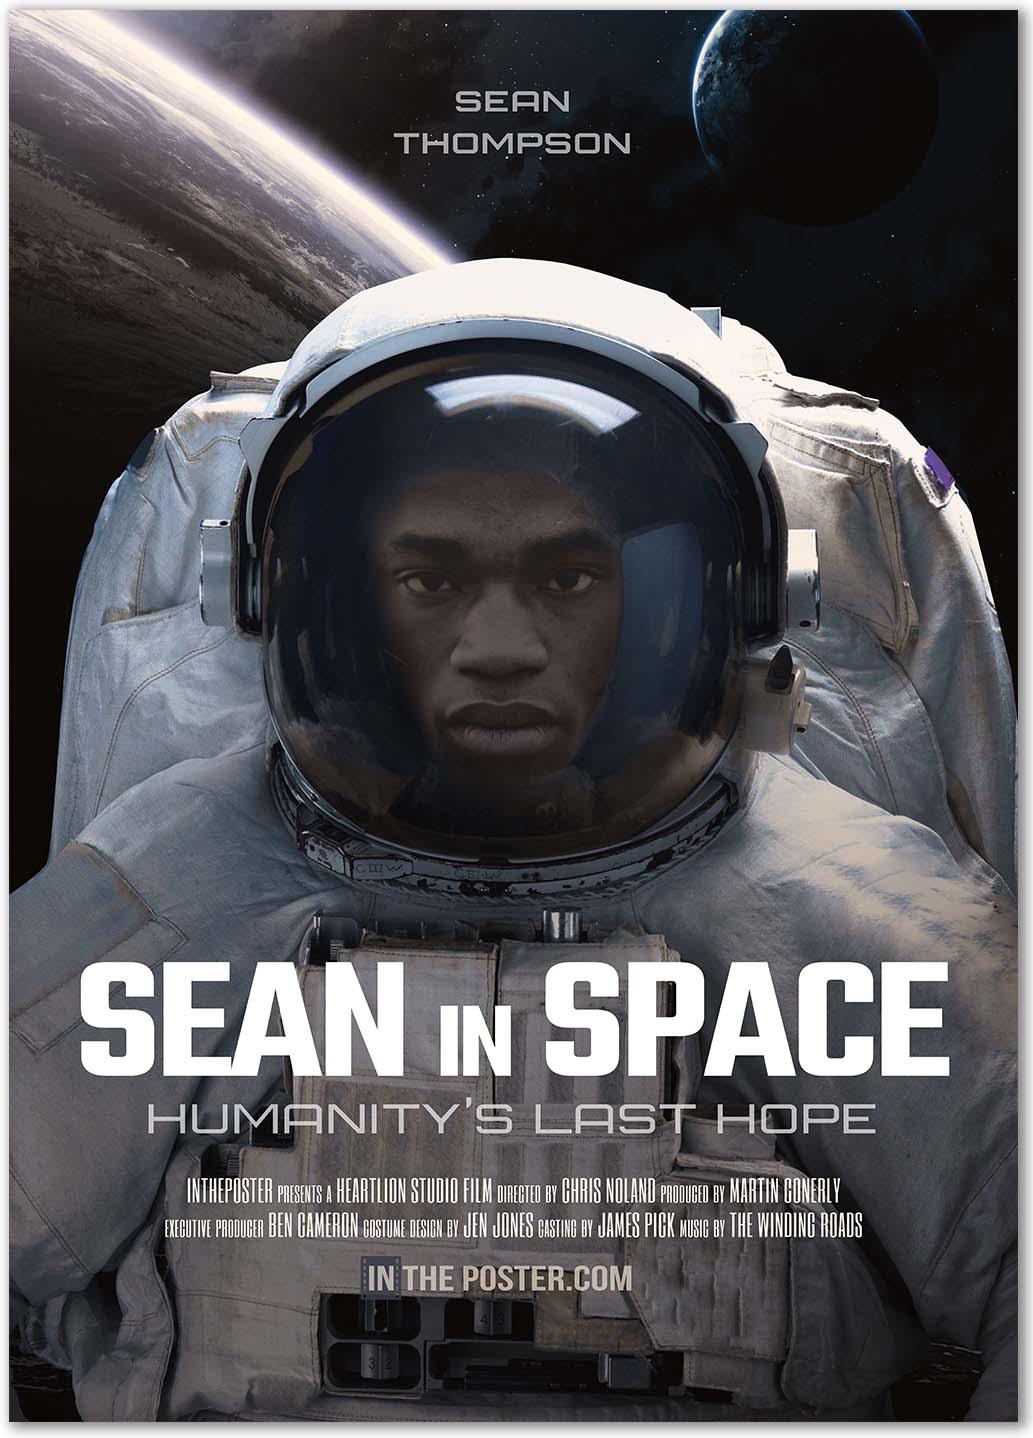 A custom sci-fi movie poster design with an astronaut floating in space high above a planet, with a space suit featuring a man.